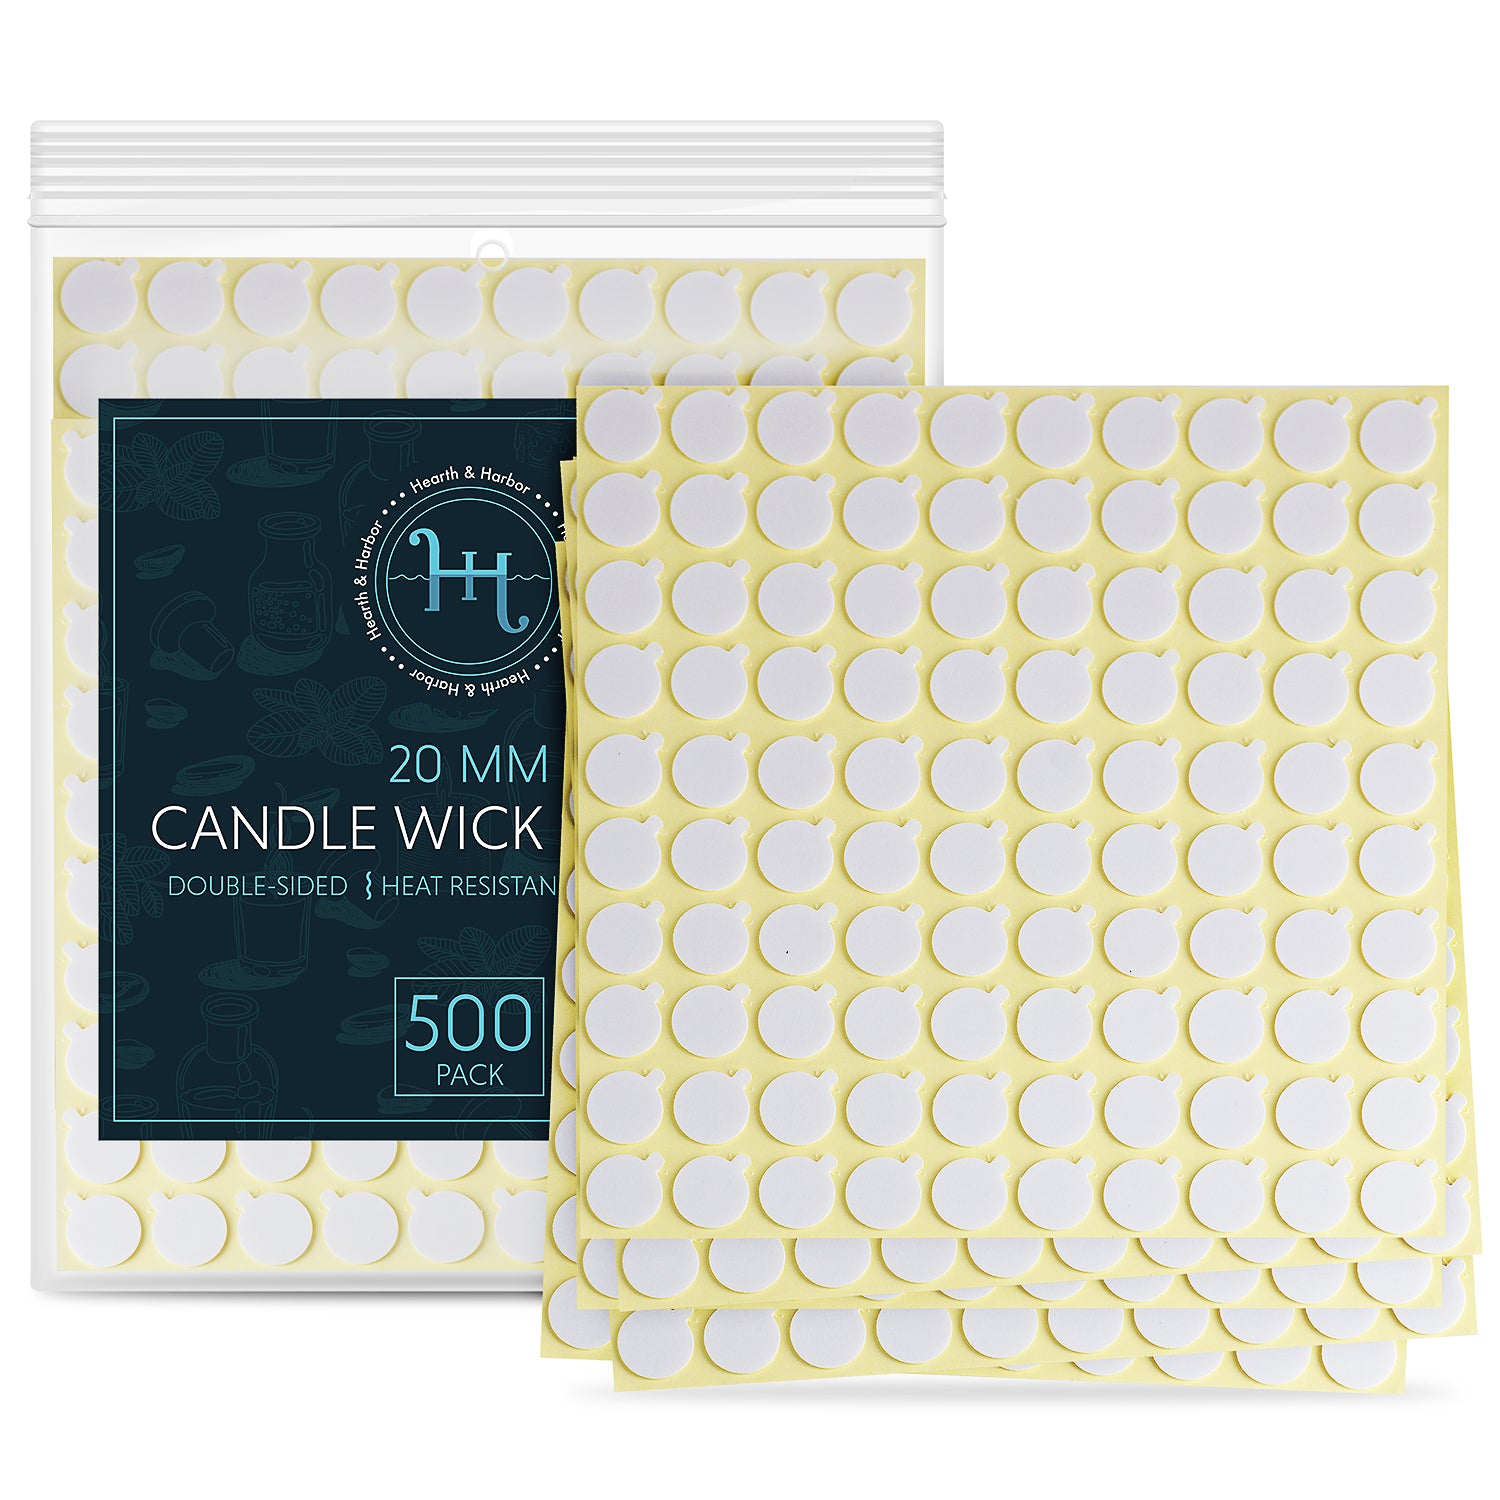 Hearth & Harbor Candle Making Stickers - 500-Pack of Double-Sided Wick Stickers